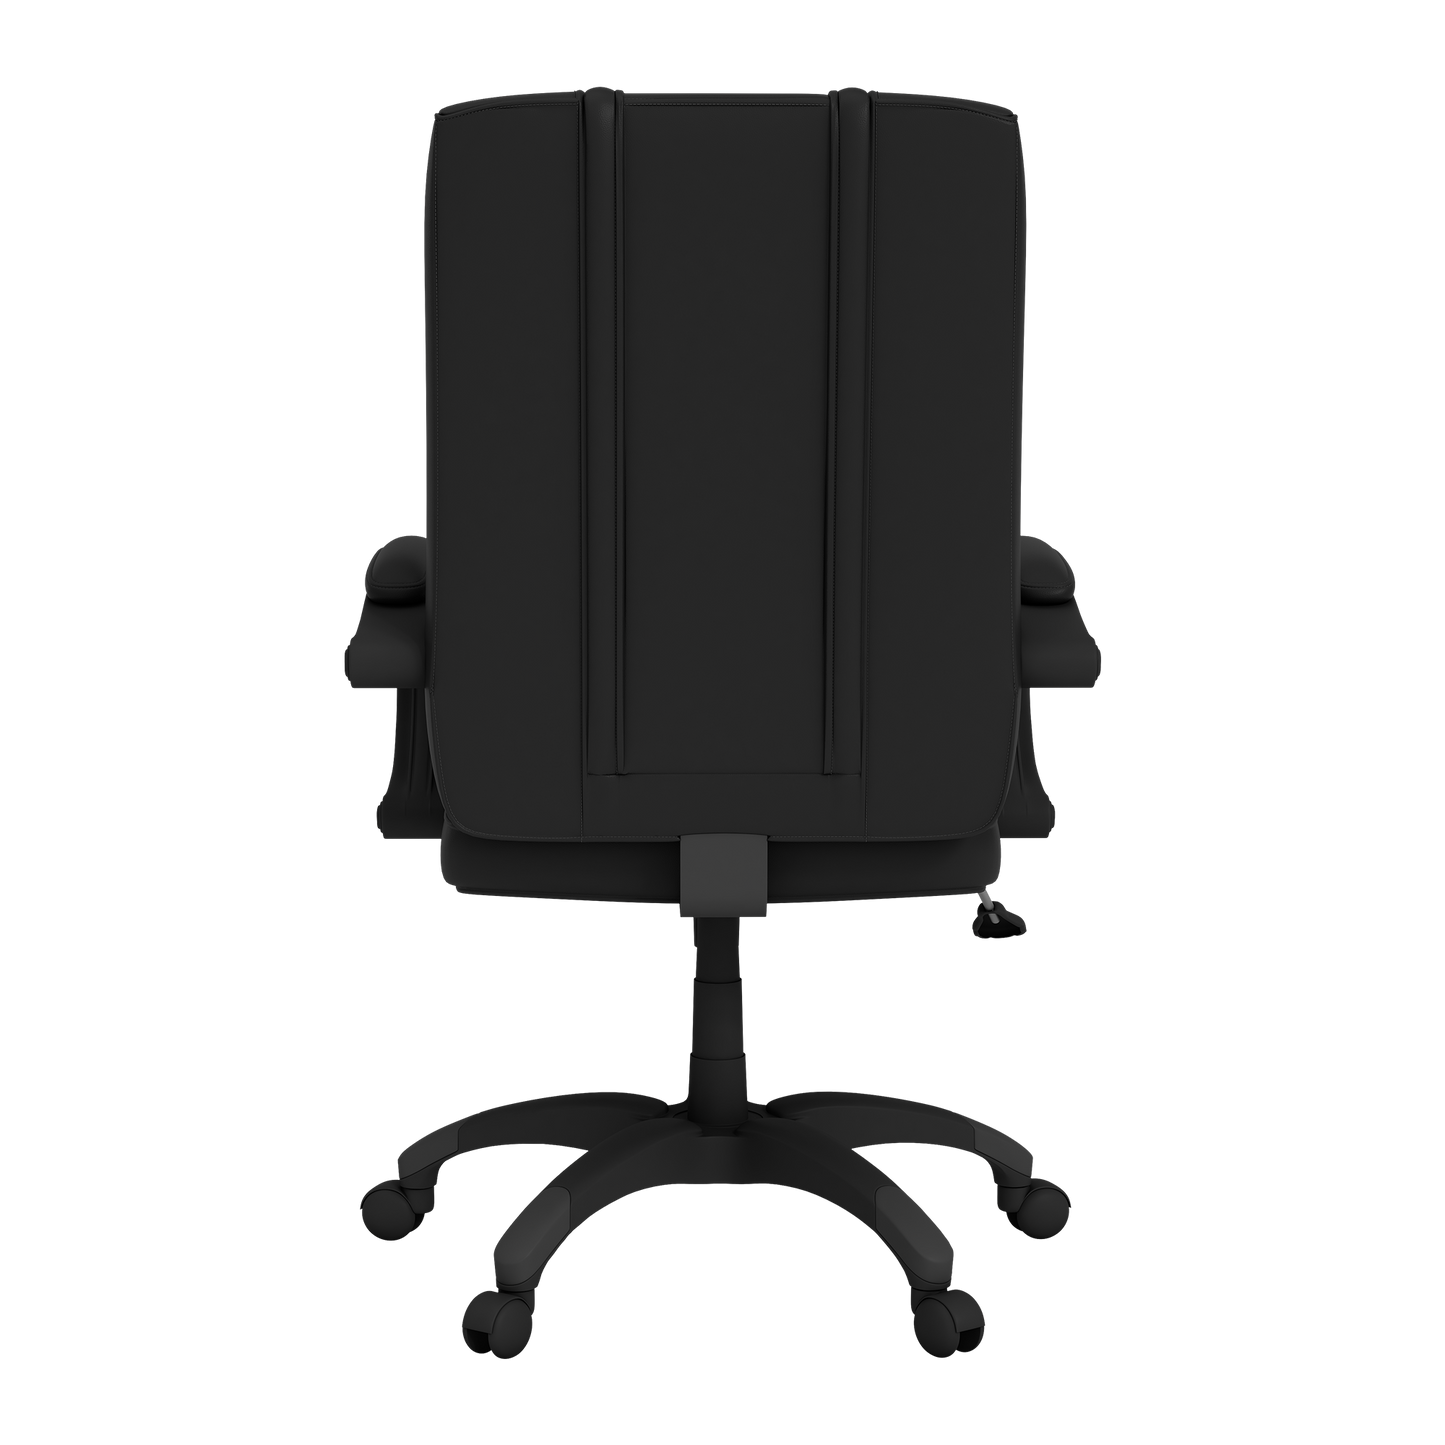 Office Chair 1000 with Boston Red Sox 2018 Champions Logo